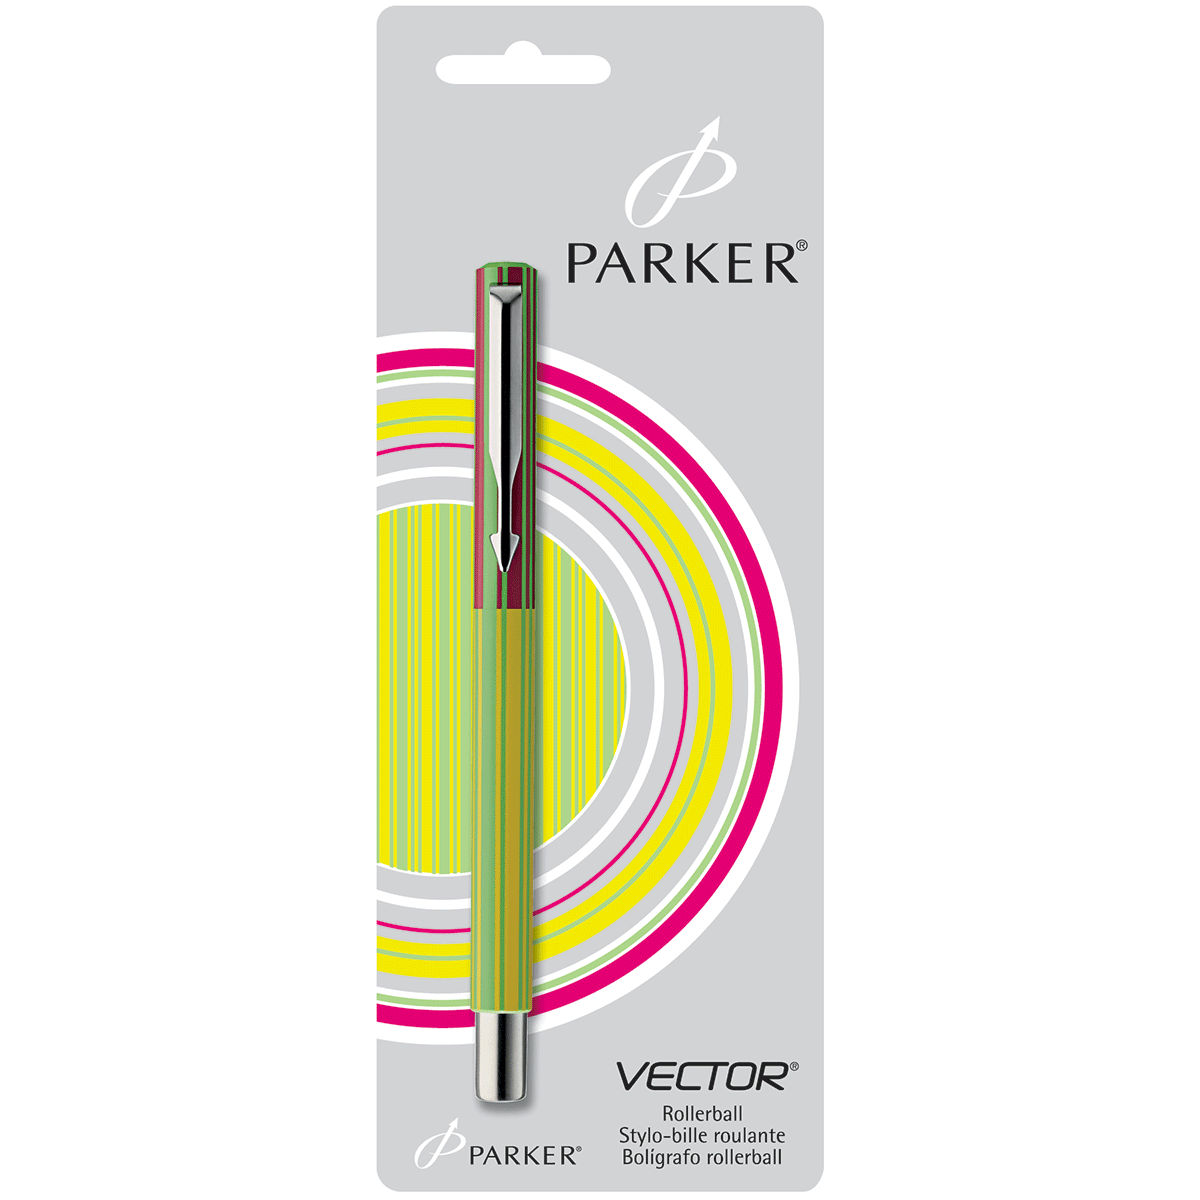 Parker Vector Fizzy Green, Neon Yellow Candy Stripe Rollerball Pen, Blue Ink  Parker Rollerball Pens